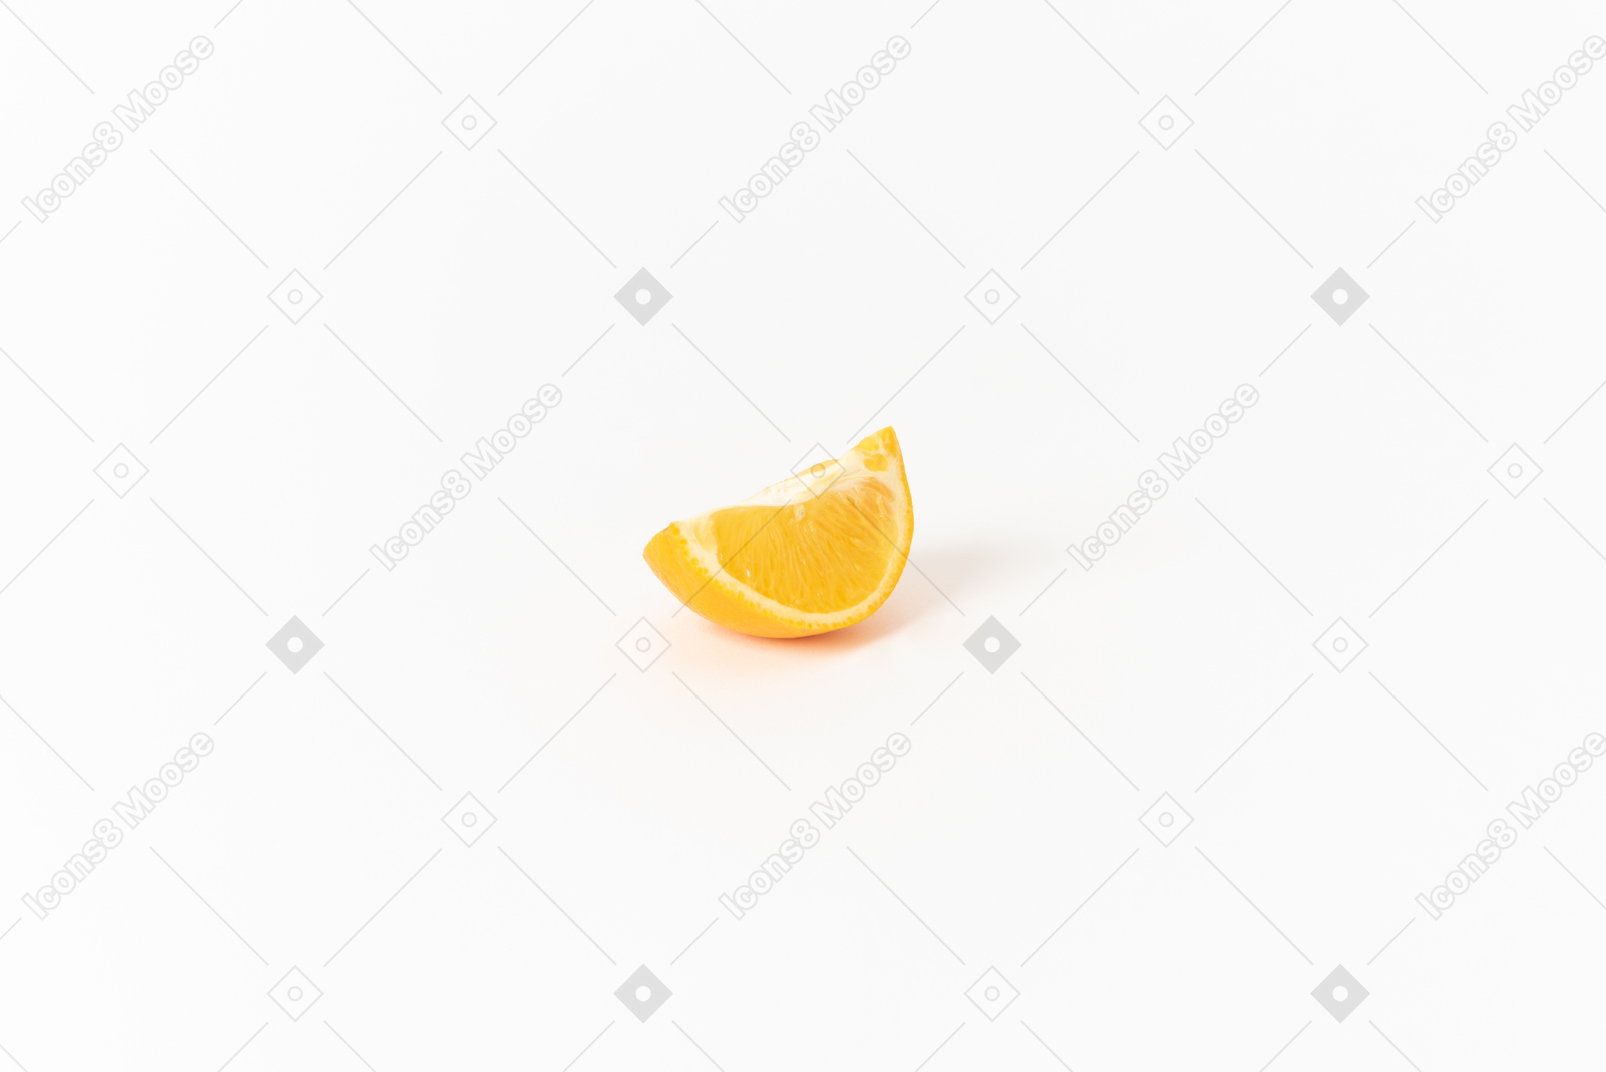 Orange is one of the world's most popular fruits